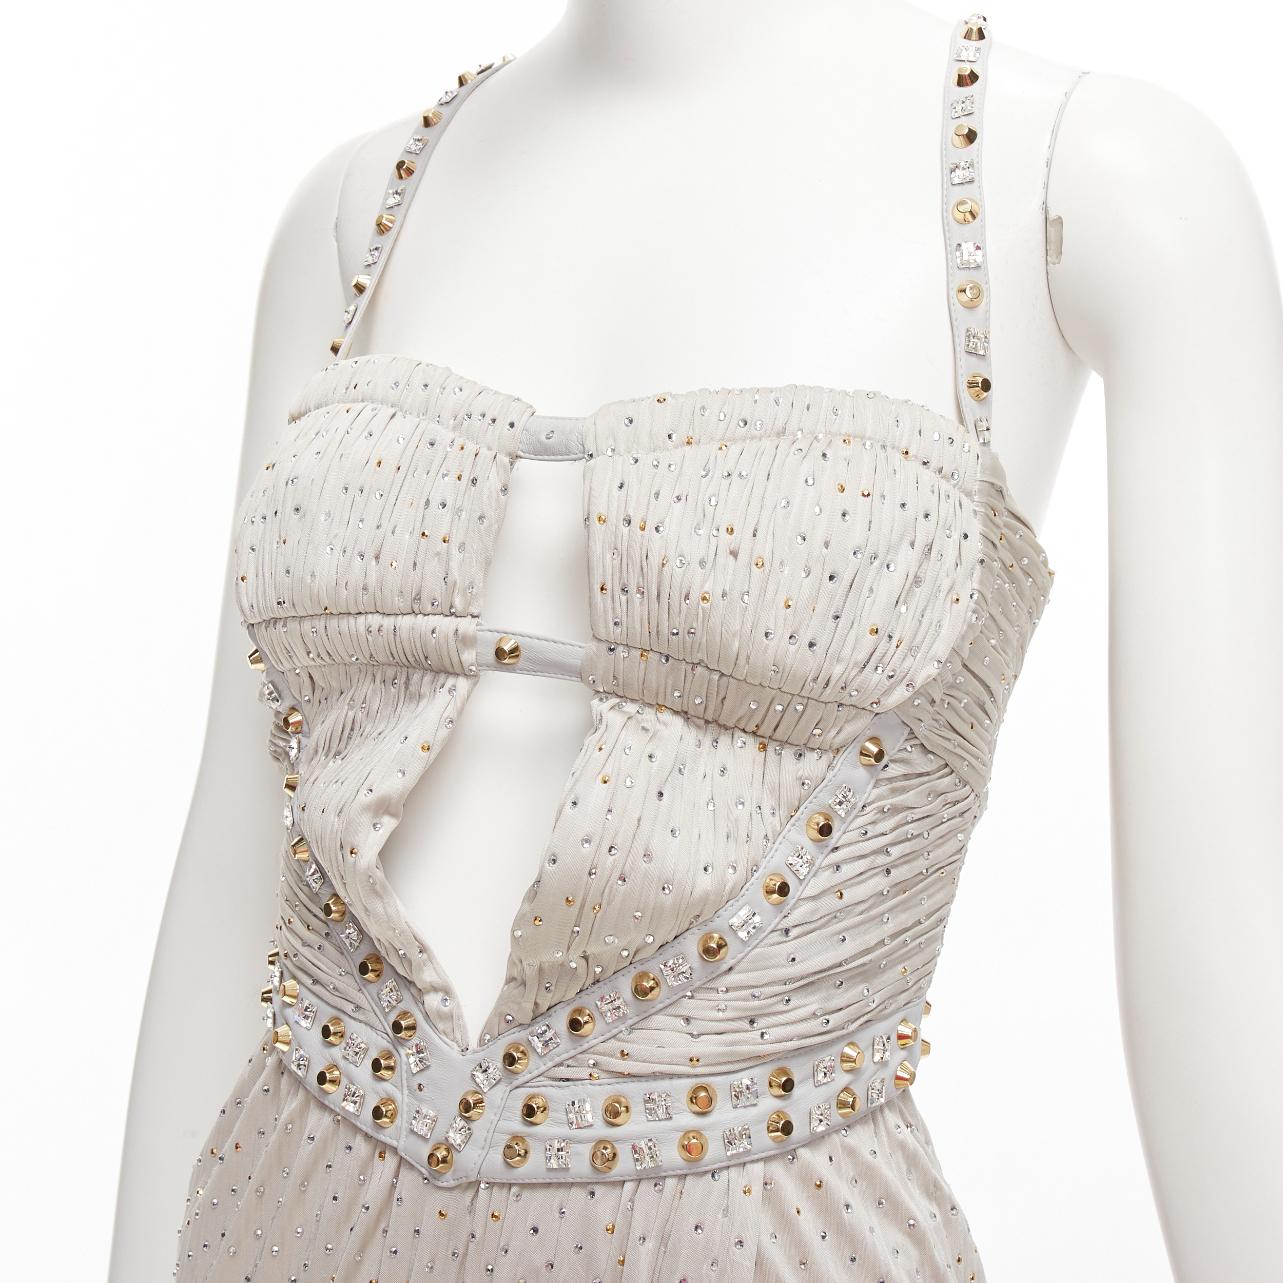 rare VERSACE 2011 Runway grey crystal embellished studded harness evening gown IT38 XS
Reference: TGAS/D01128
Brand: Versace
Designer: Donatella Versace
Collection: 2011 - Runway
Material: Viscose, Leather
Color: Silver
Pattern: Studded
Closure: